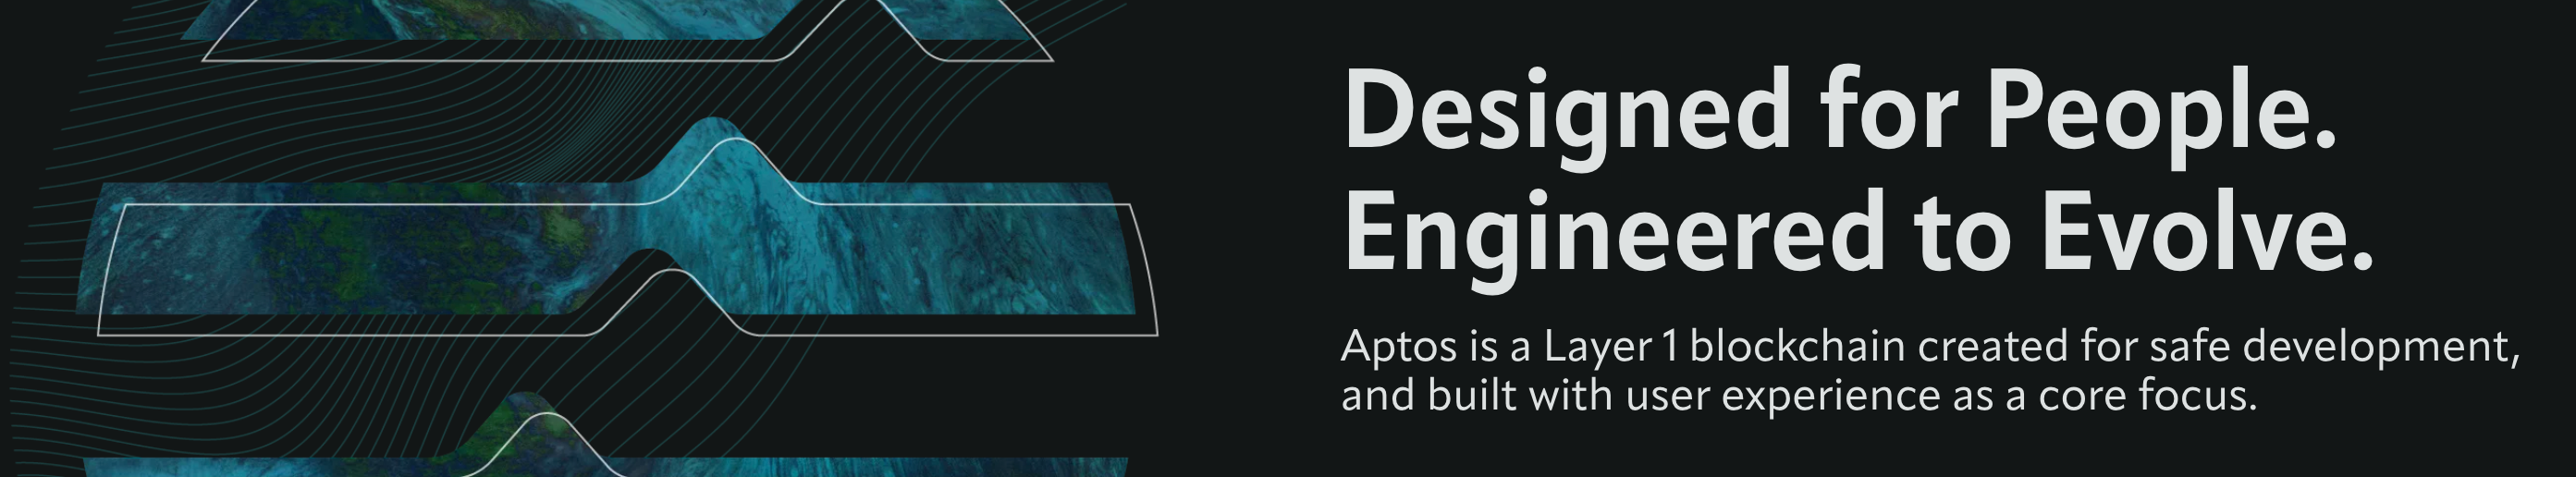 A banner showing that Aptos crypto (APT) is designed for people and made to evolve.